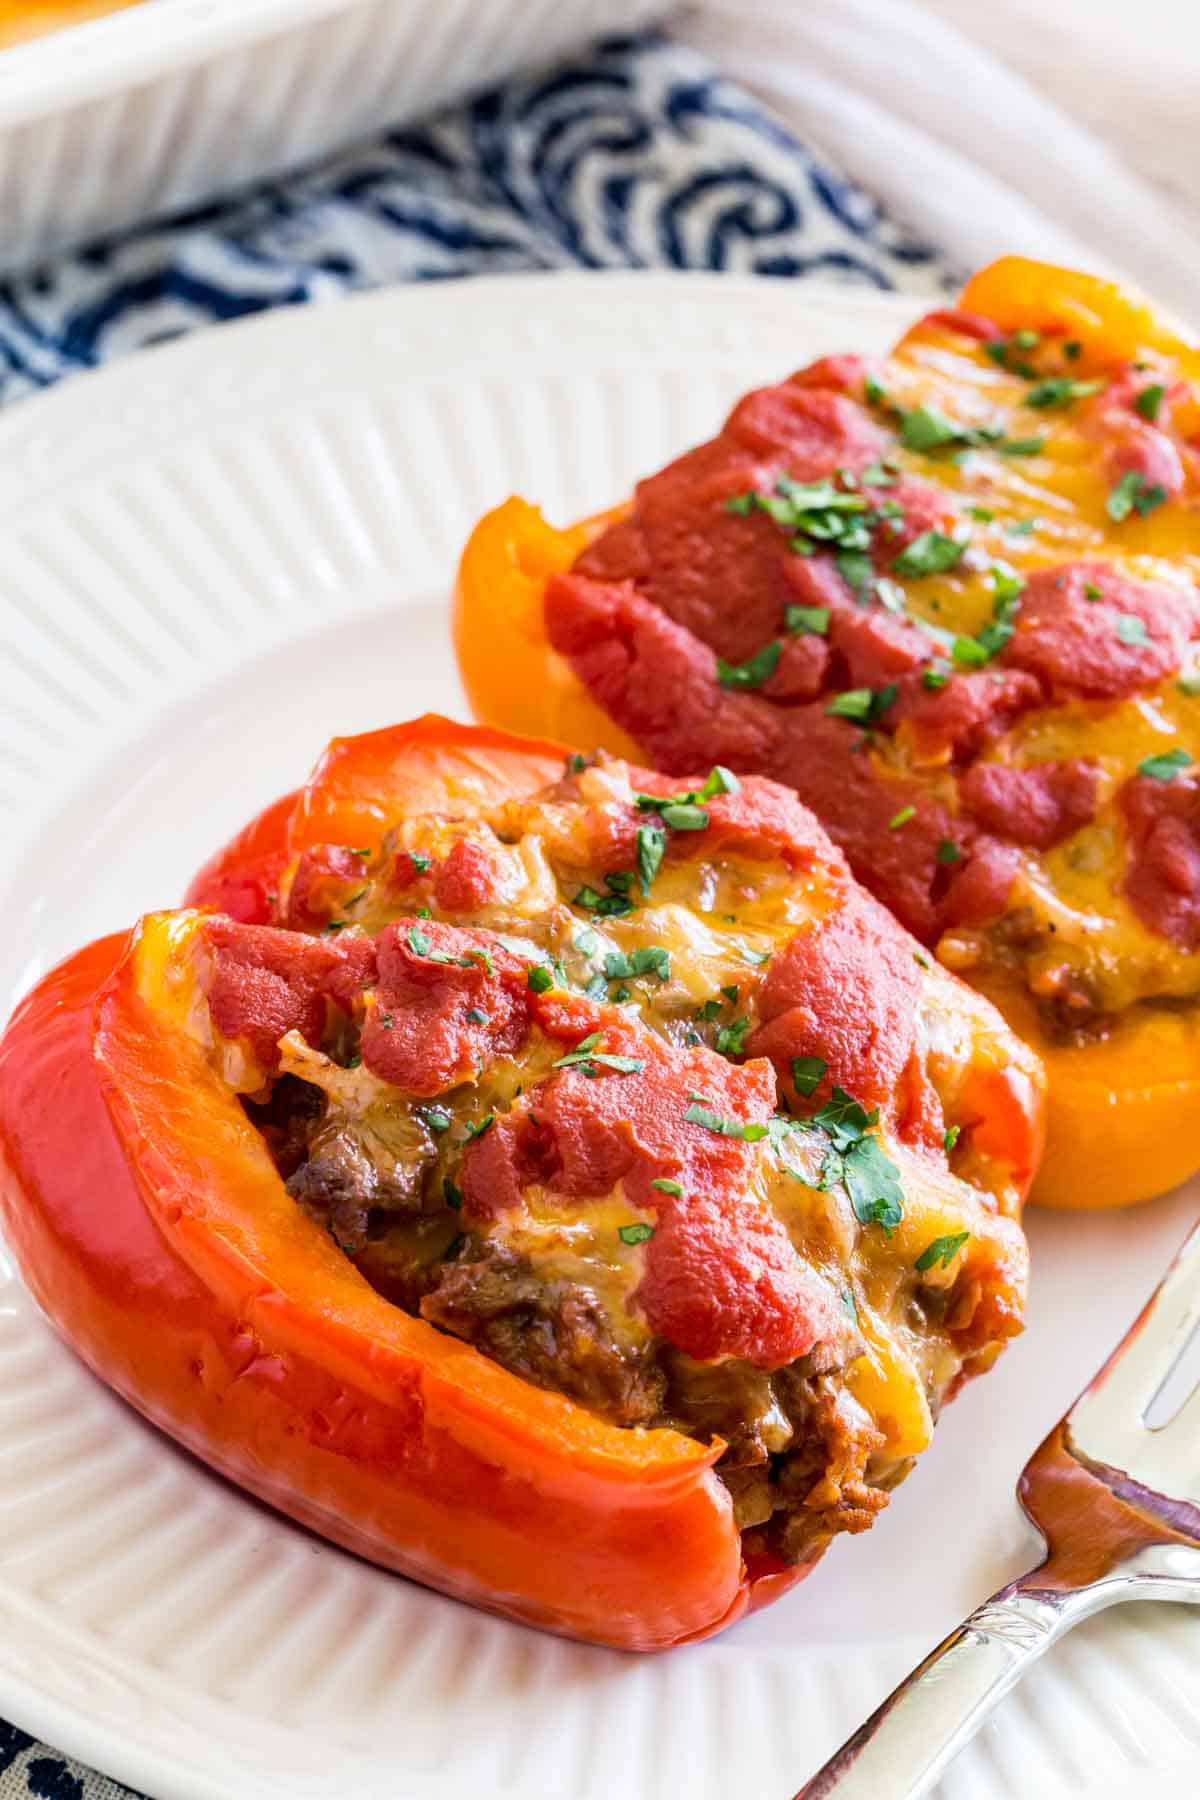 Two stuffed pepper halves on a white plate.